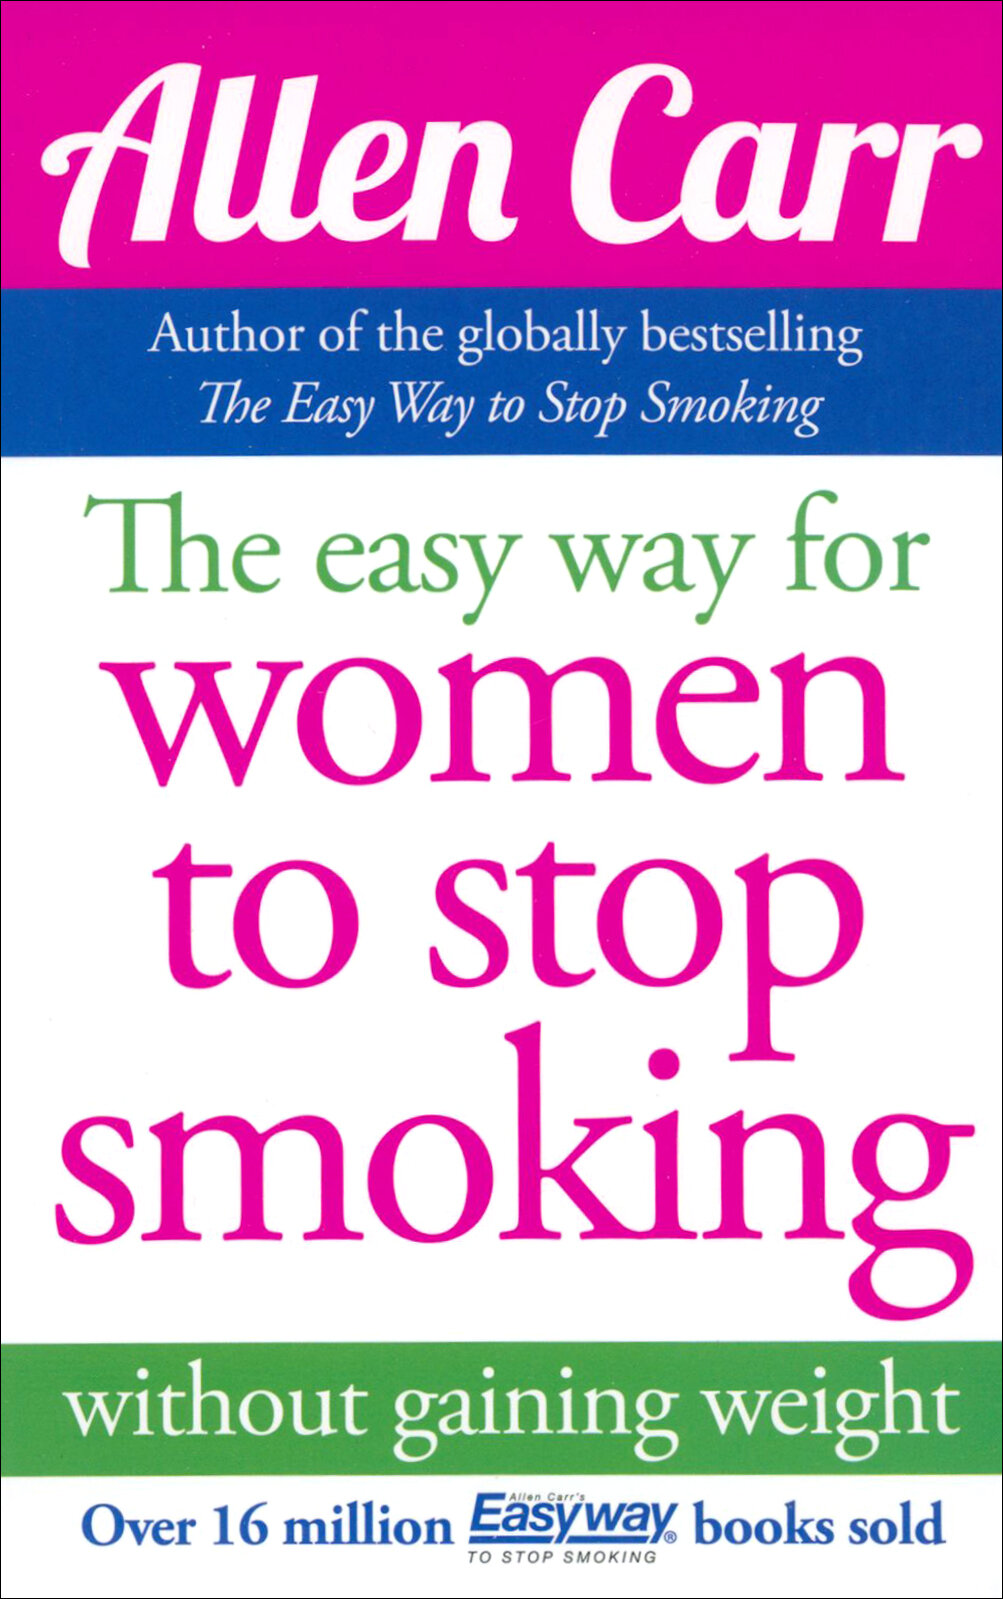 The Easy Way for Women to Stop Smoking without gaining weight / Carr Allen / Книга на Английском / Карр Аллен